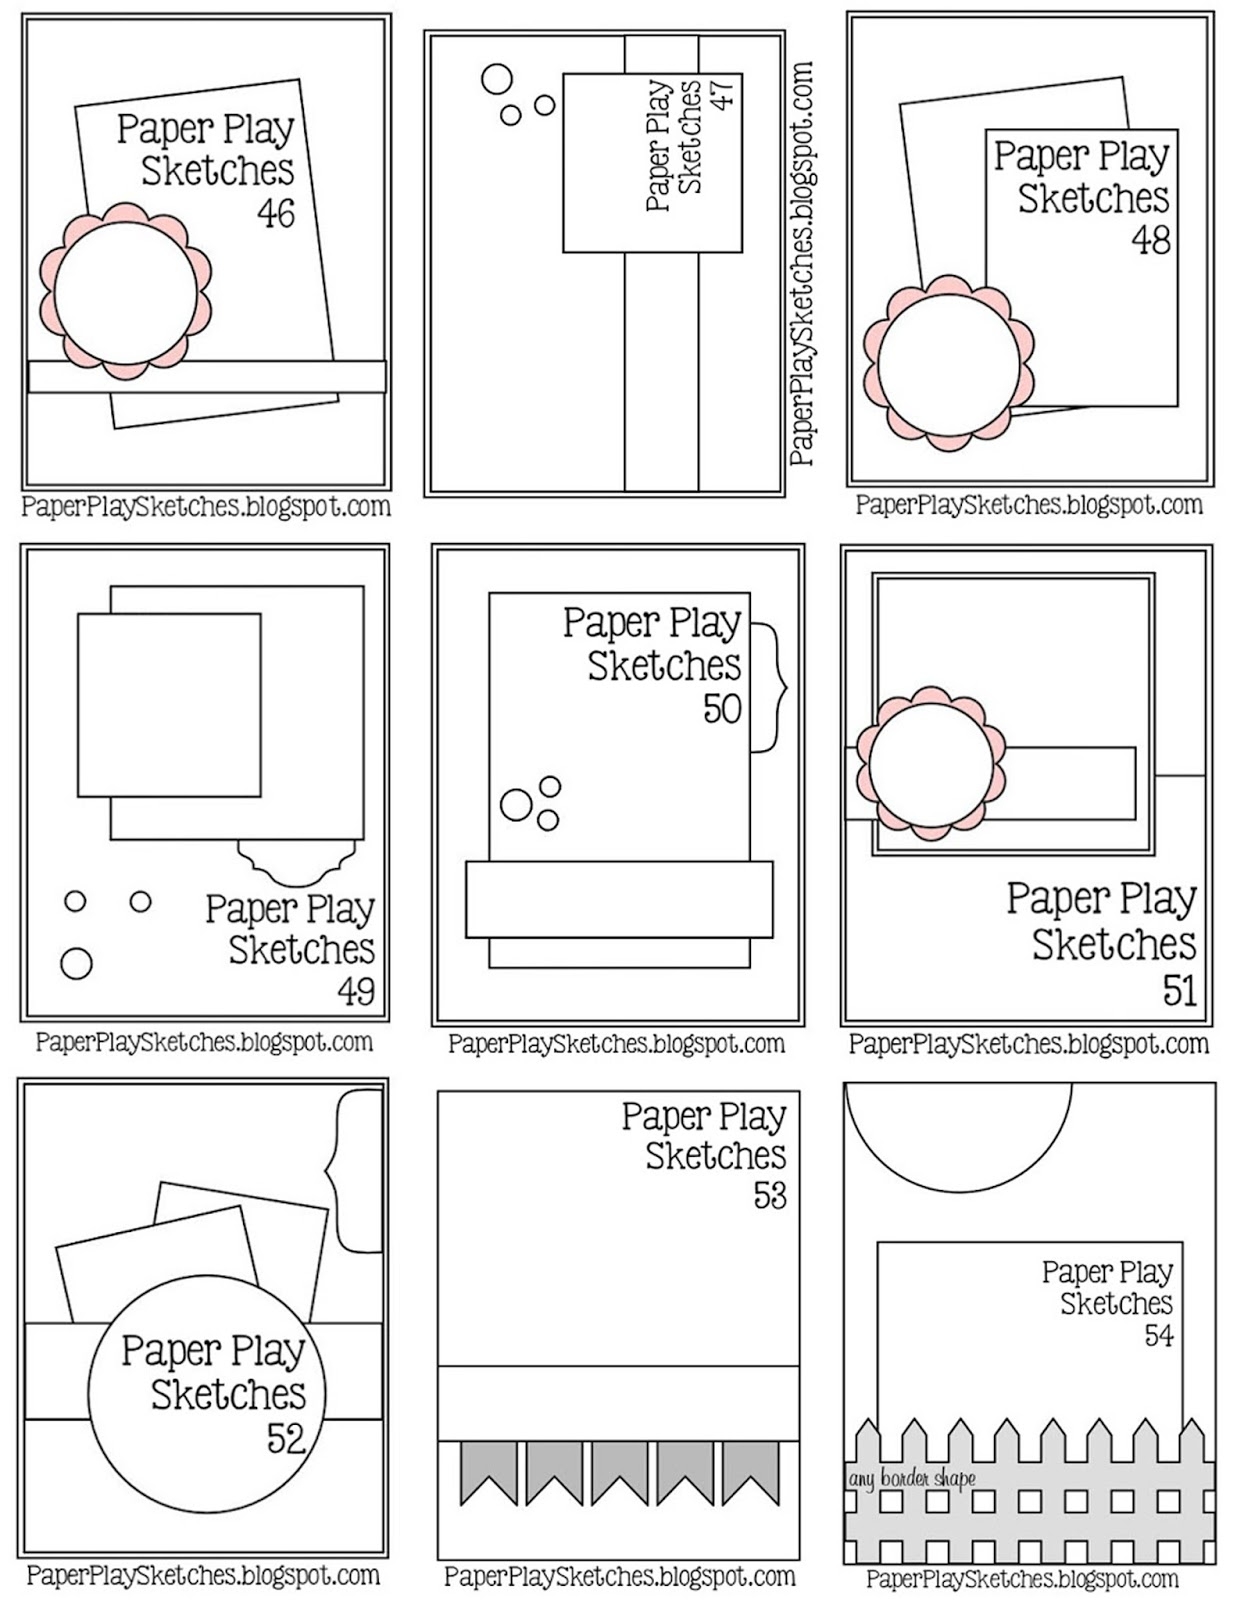 Paper Play Sketches Sketch Sheets To Print